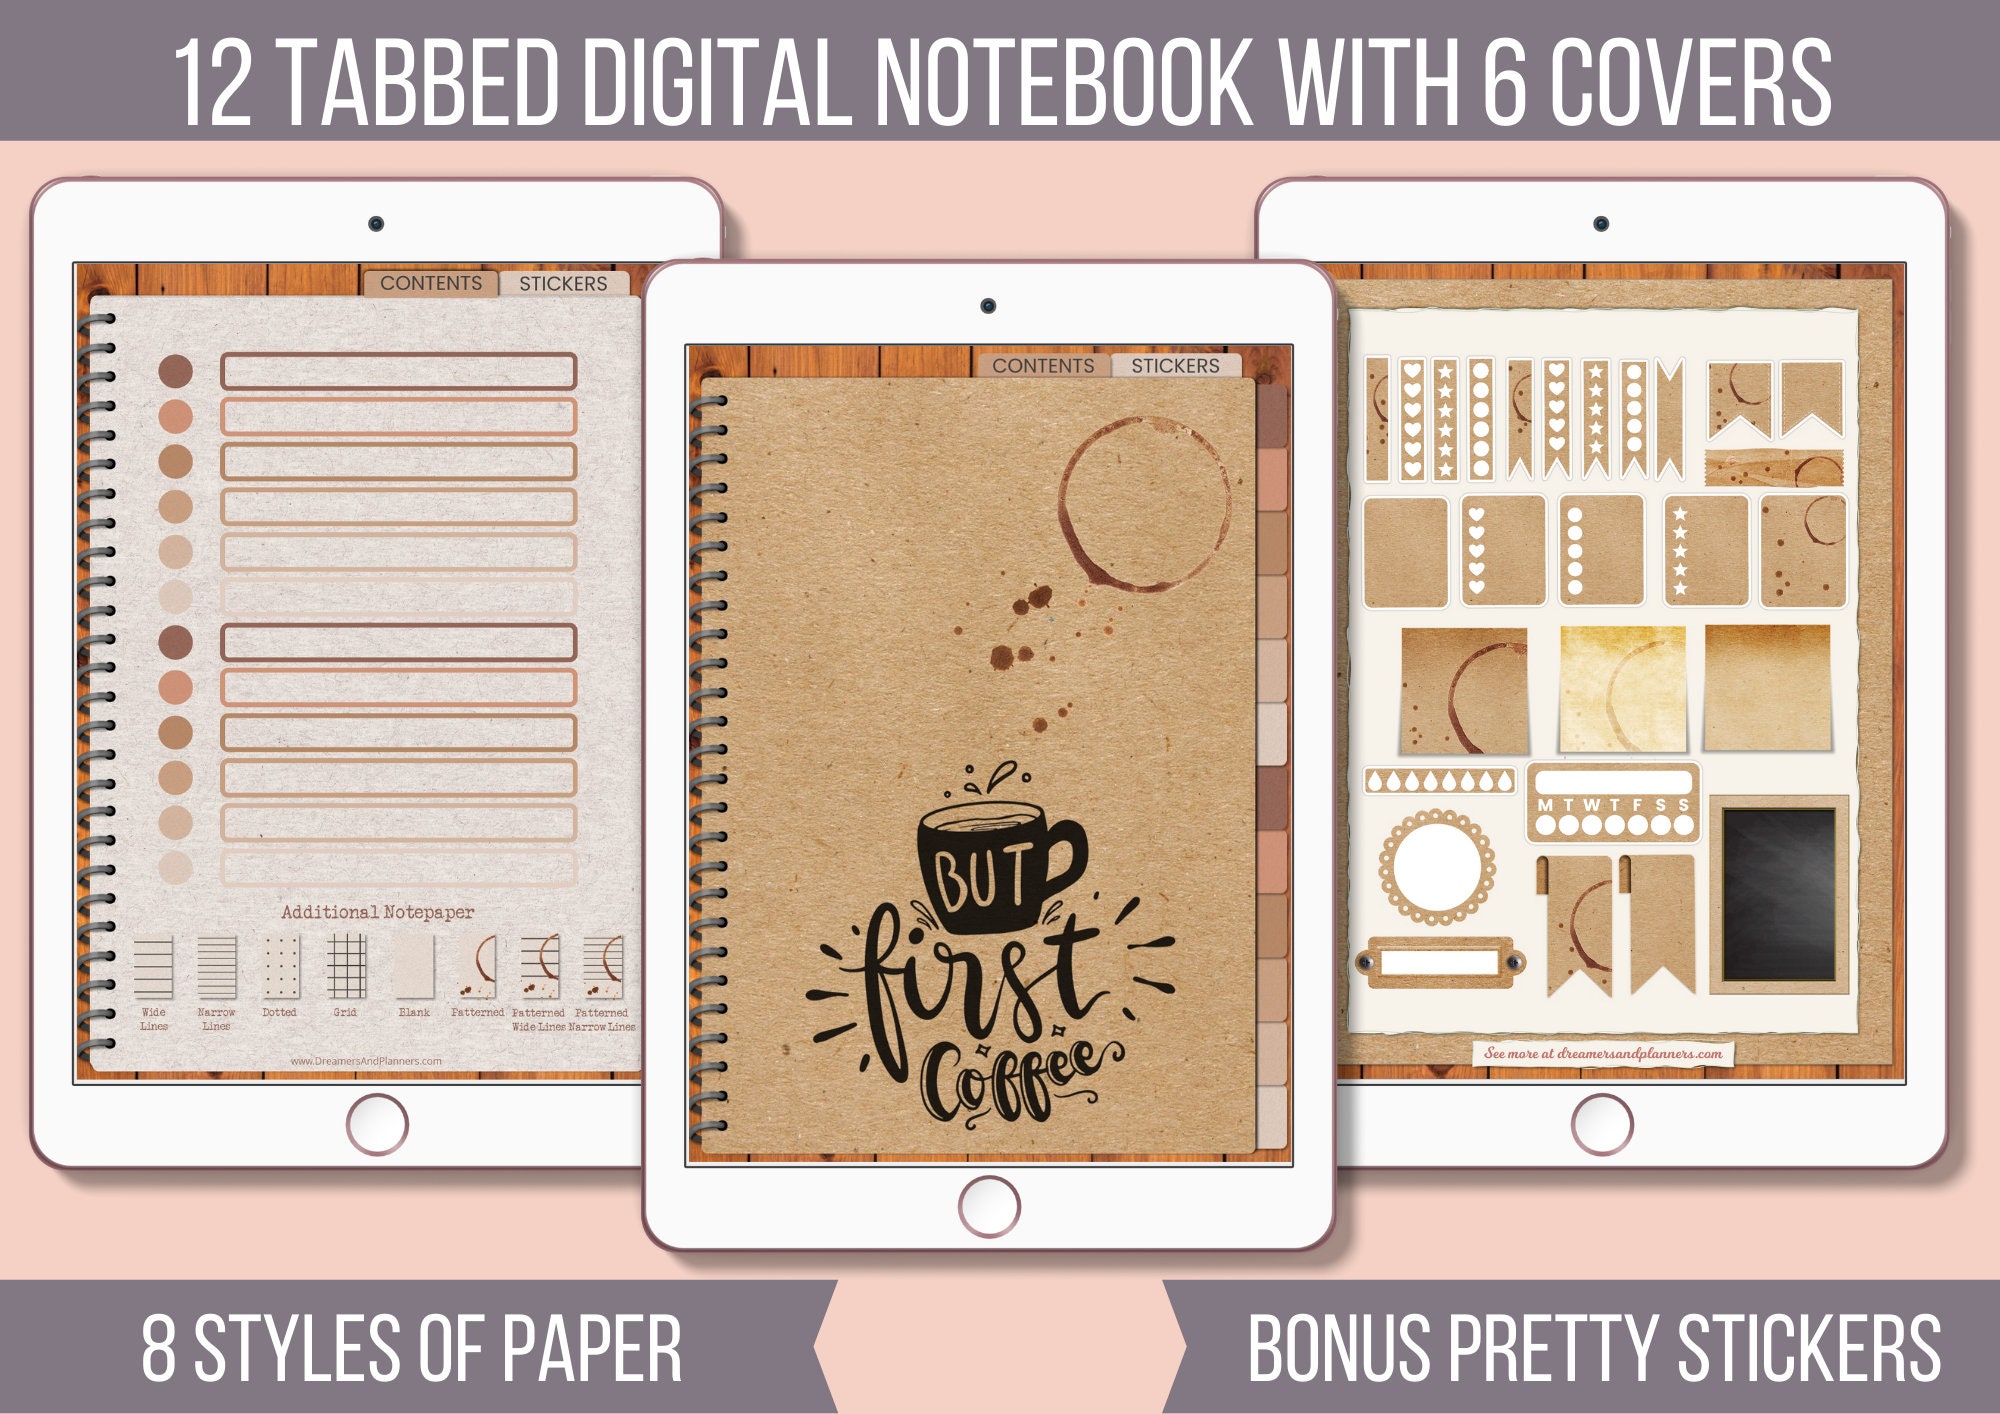 Knitting Project Planner Digital Goodnotes, Digital Knitting Planner,  Digital Tabs, Digital Journal Goodnotes, Digital Knitting Journal 